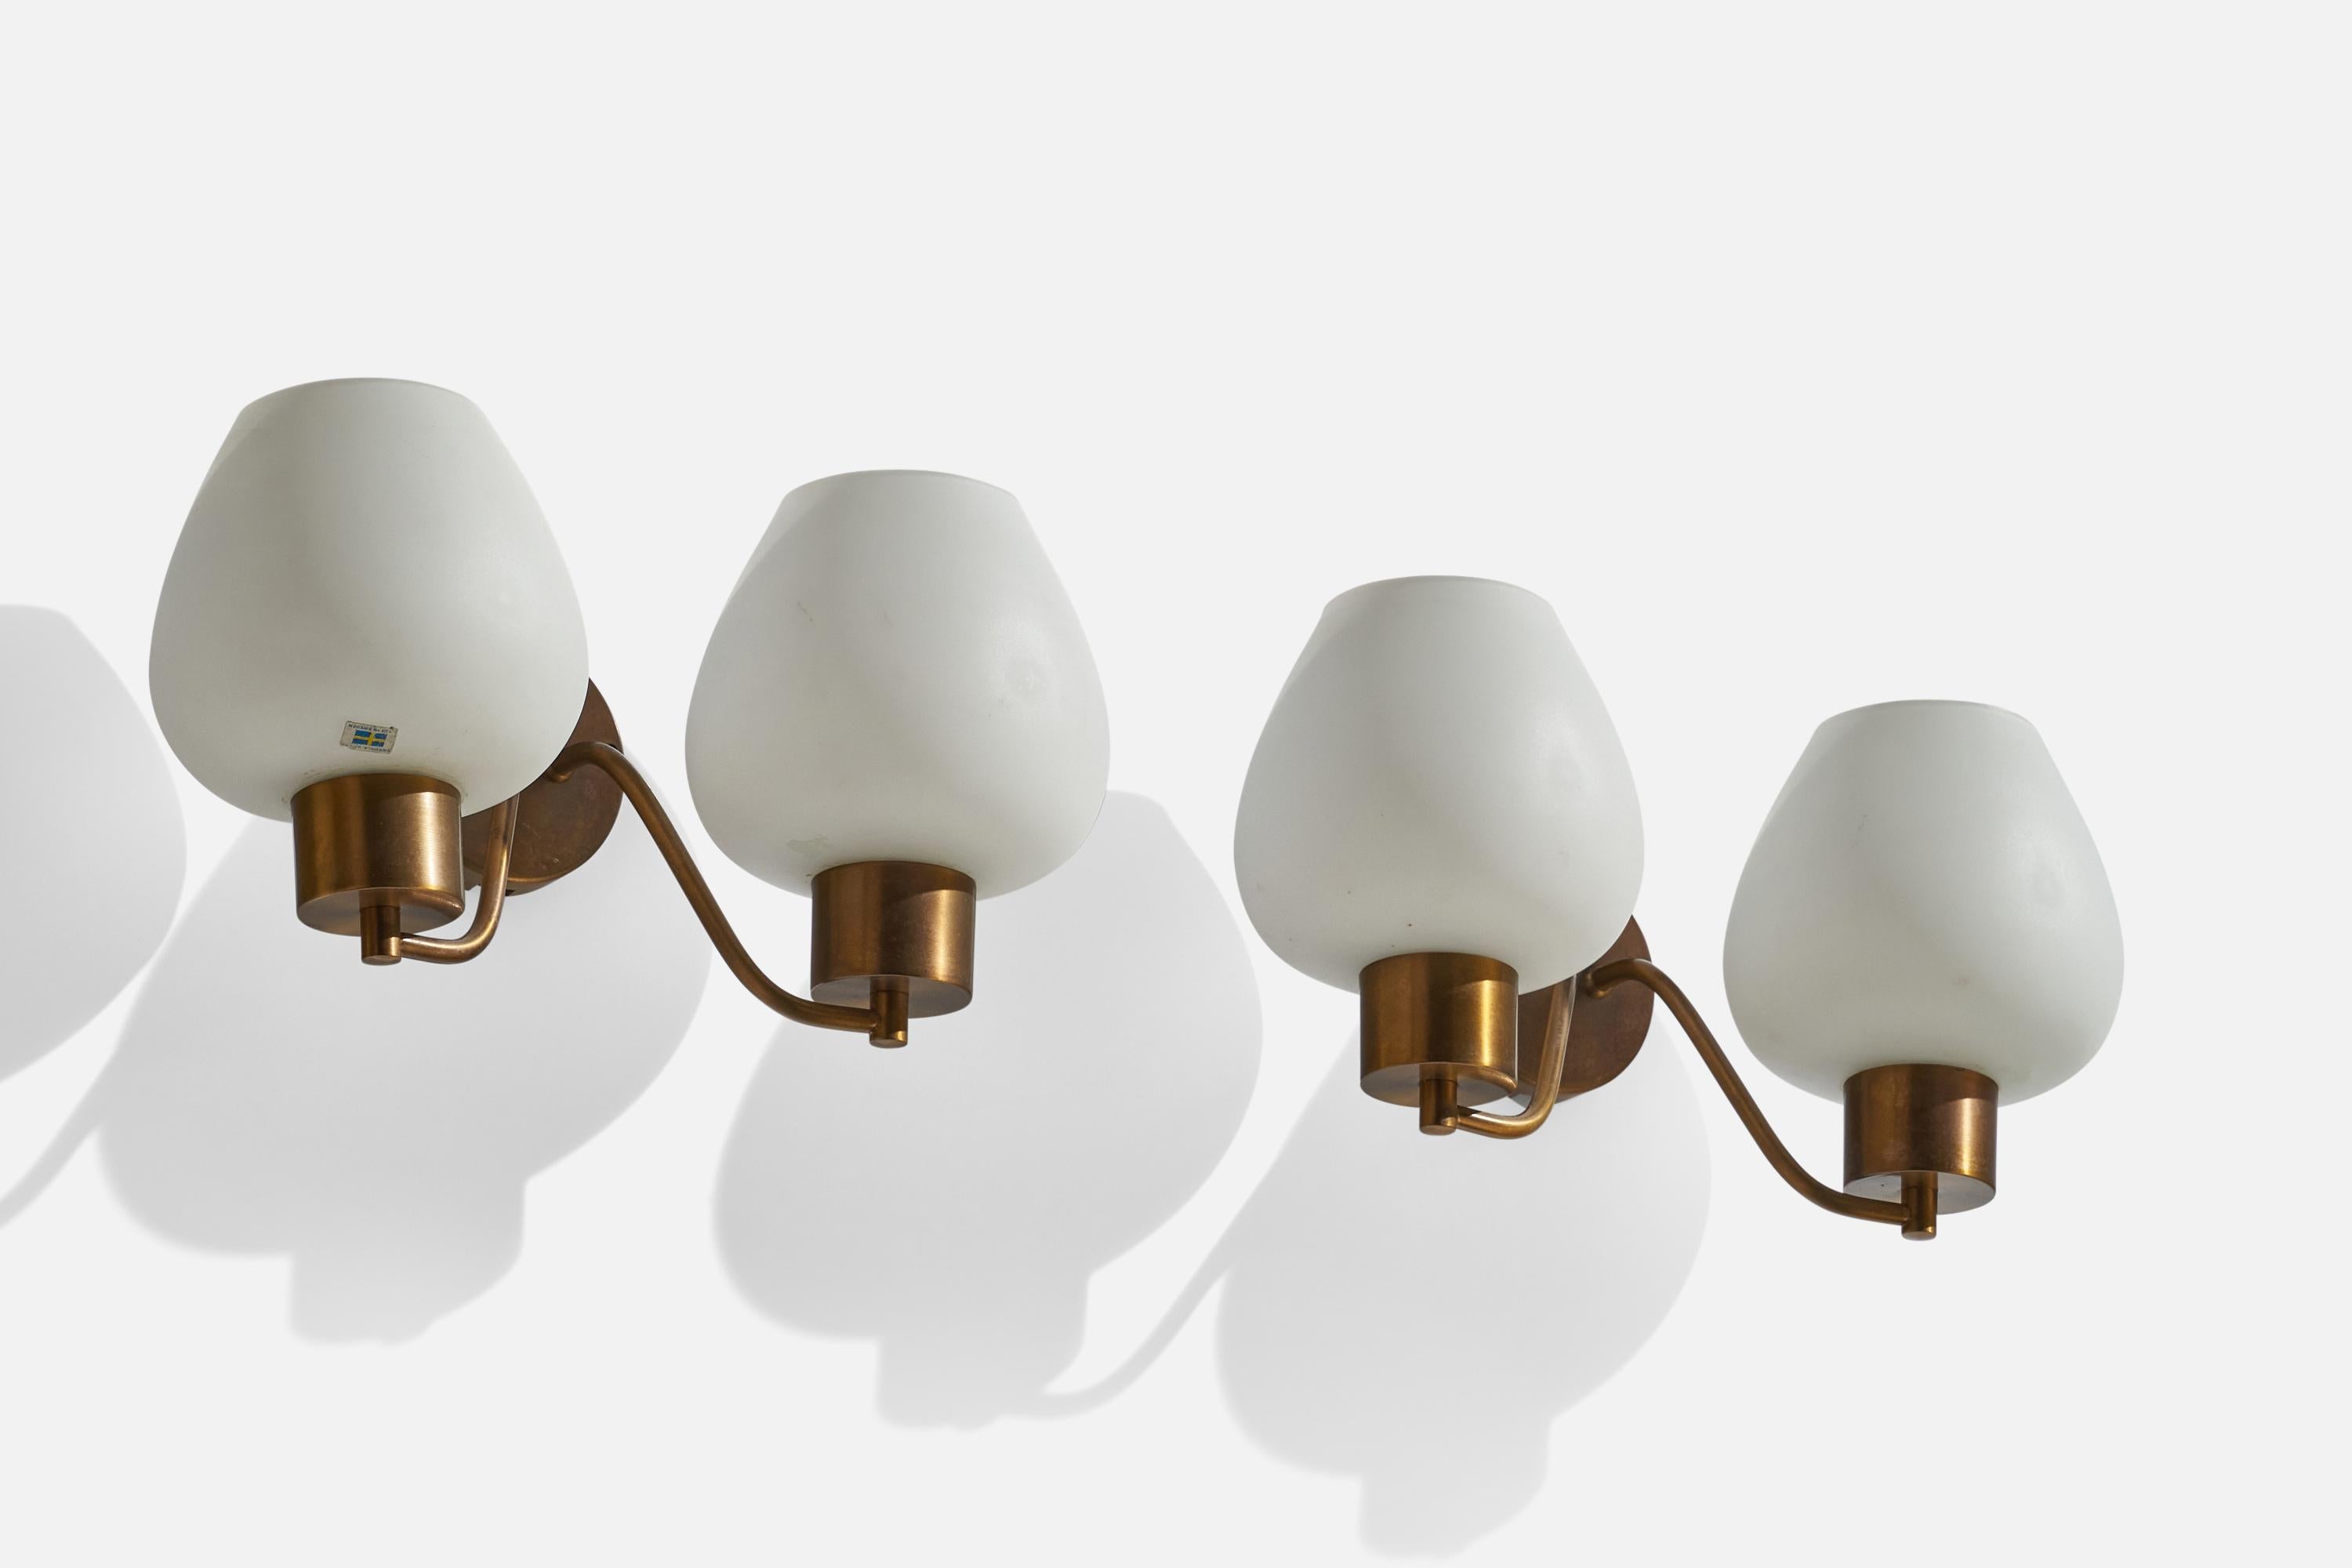 A pair of brass and opaline glass wall lights designed and produced Rosdala Glas, Sweden, c. 1970s.

Overall Dimensions (inches): 8.5”  H x 16”  W x 8” D
Back Plate Dimensions (inches): 4” H x 4”  W x .75” D
Bulb Specifications: E-26 Bulb
Number of